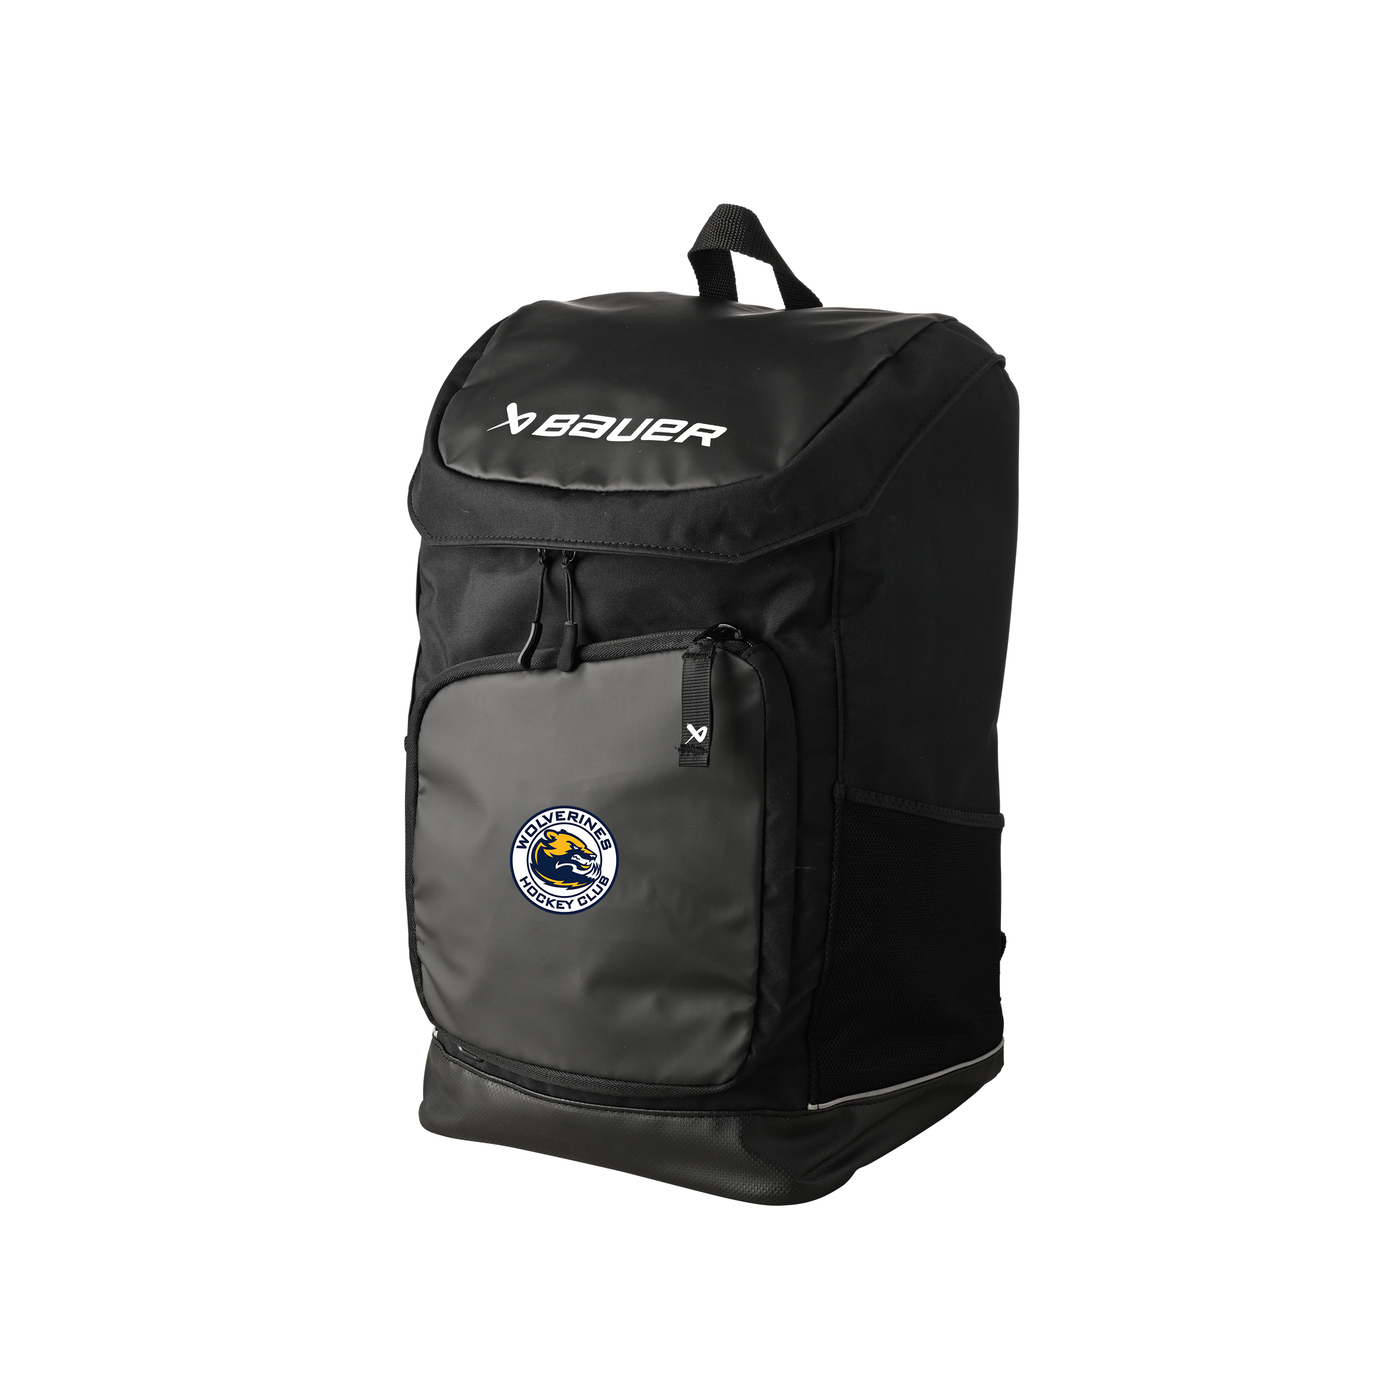 Bauer Pro Backpack - Wolverines